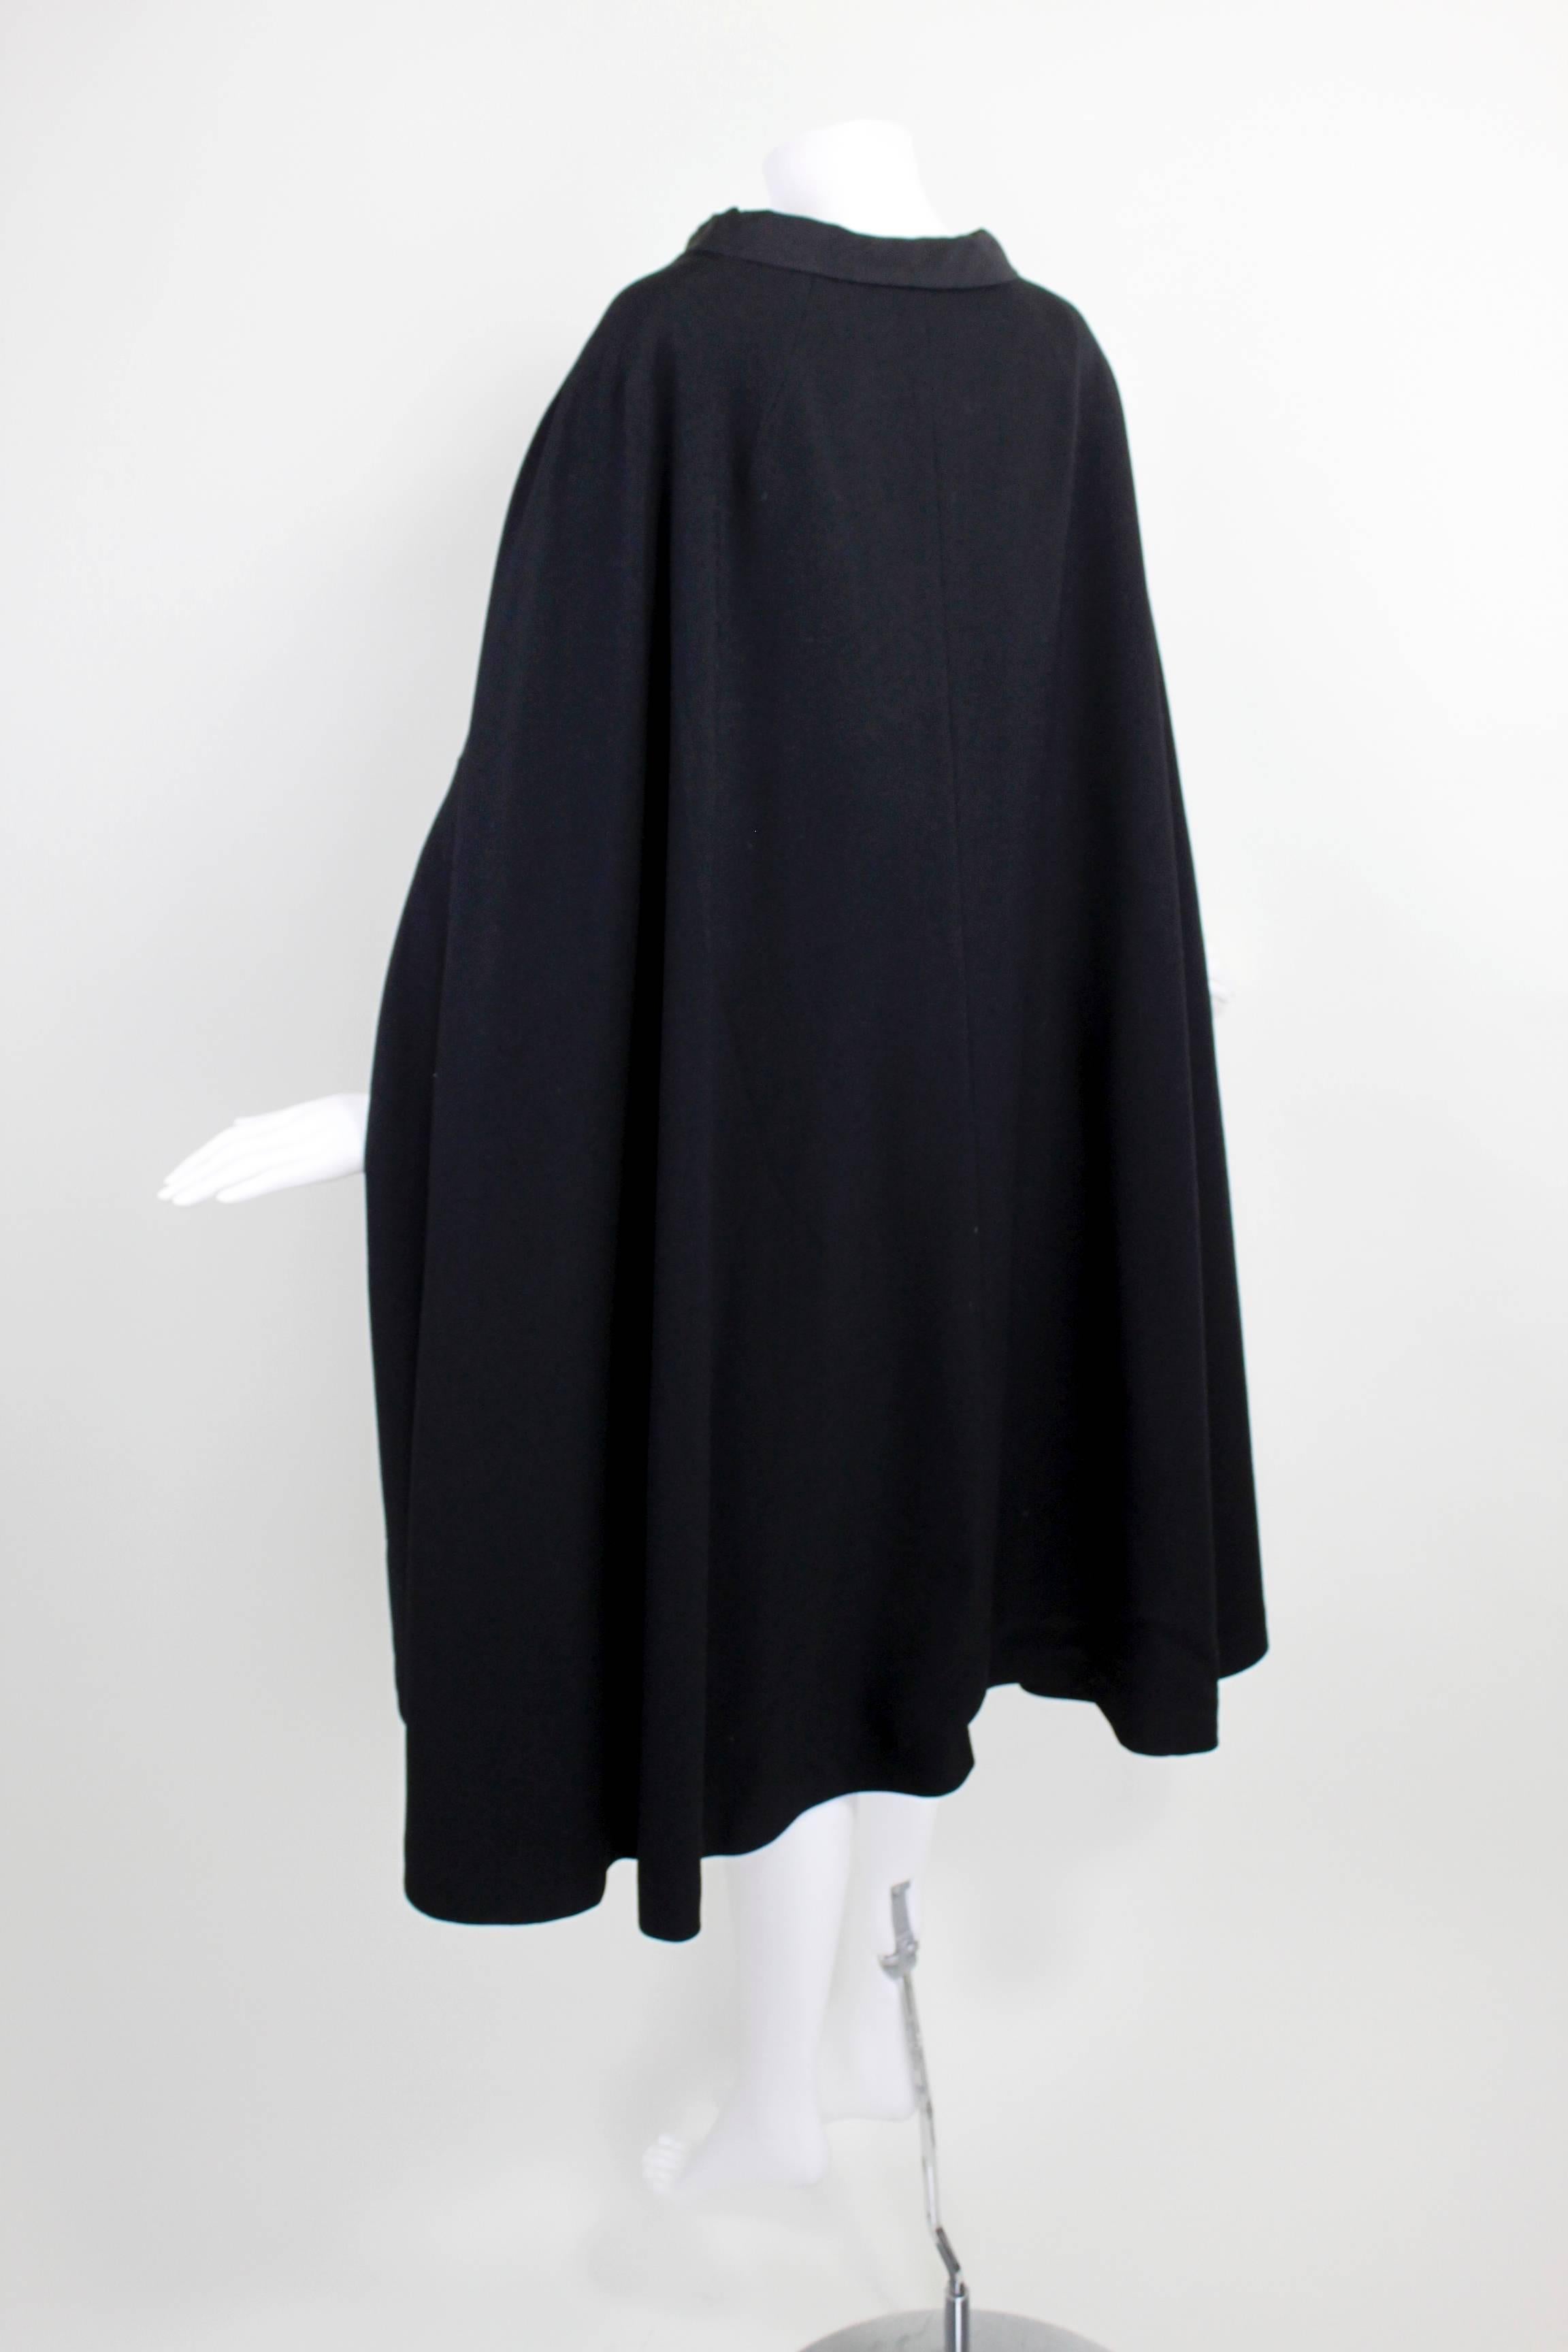 1960s Pierre Cardin Iconic Black Wool Cape with Silk Lining For Sale 1